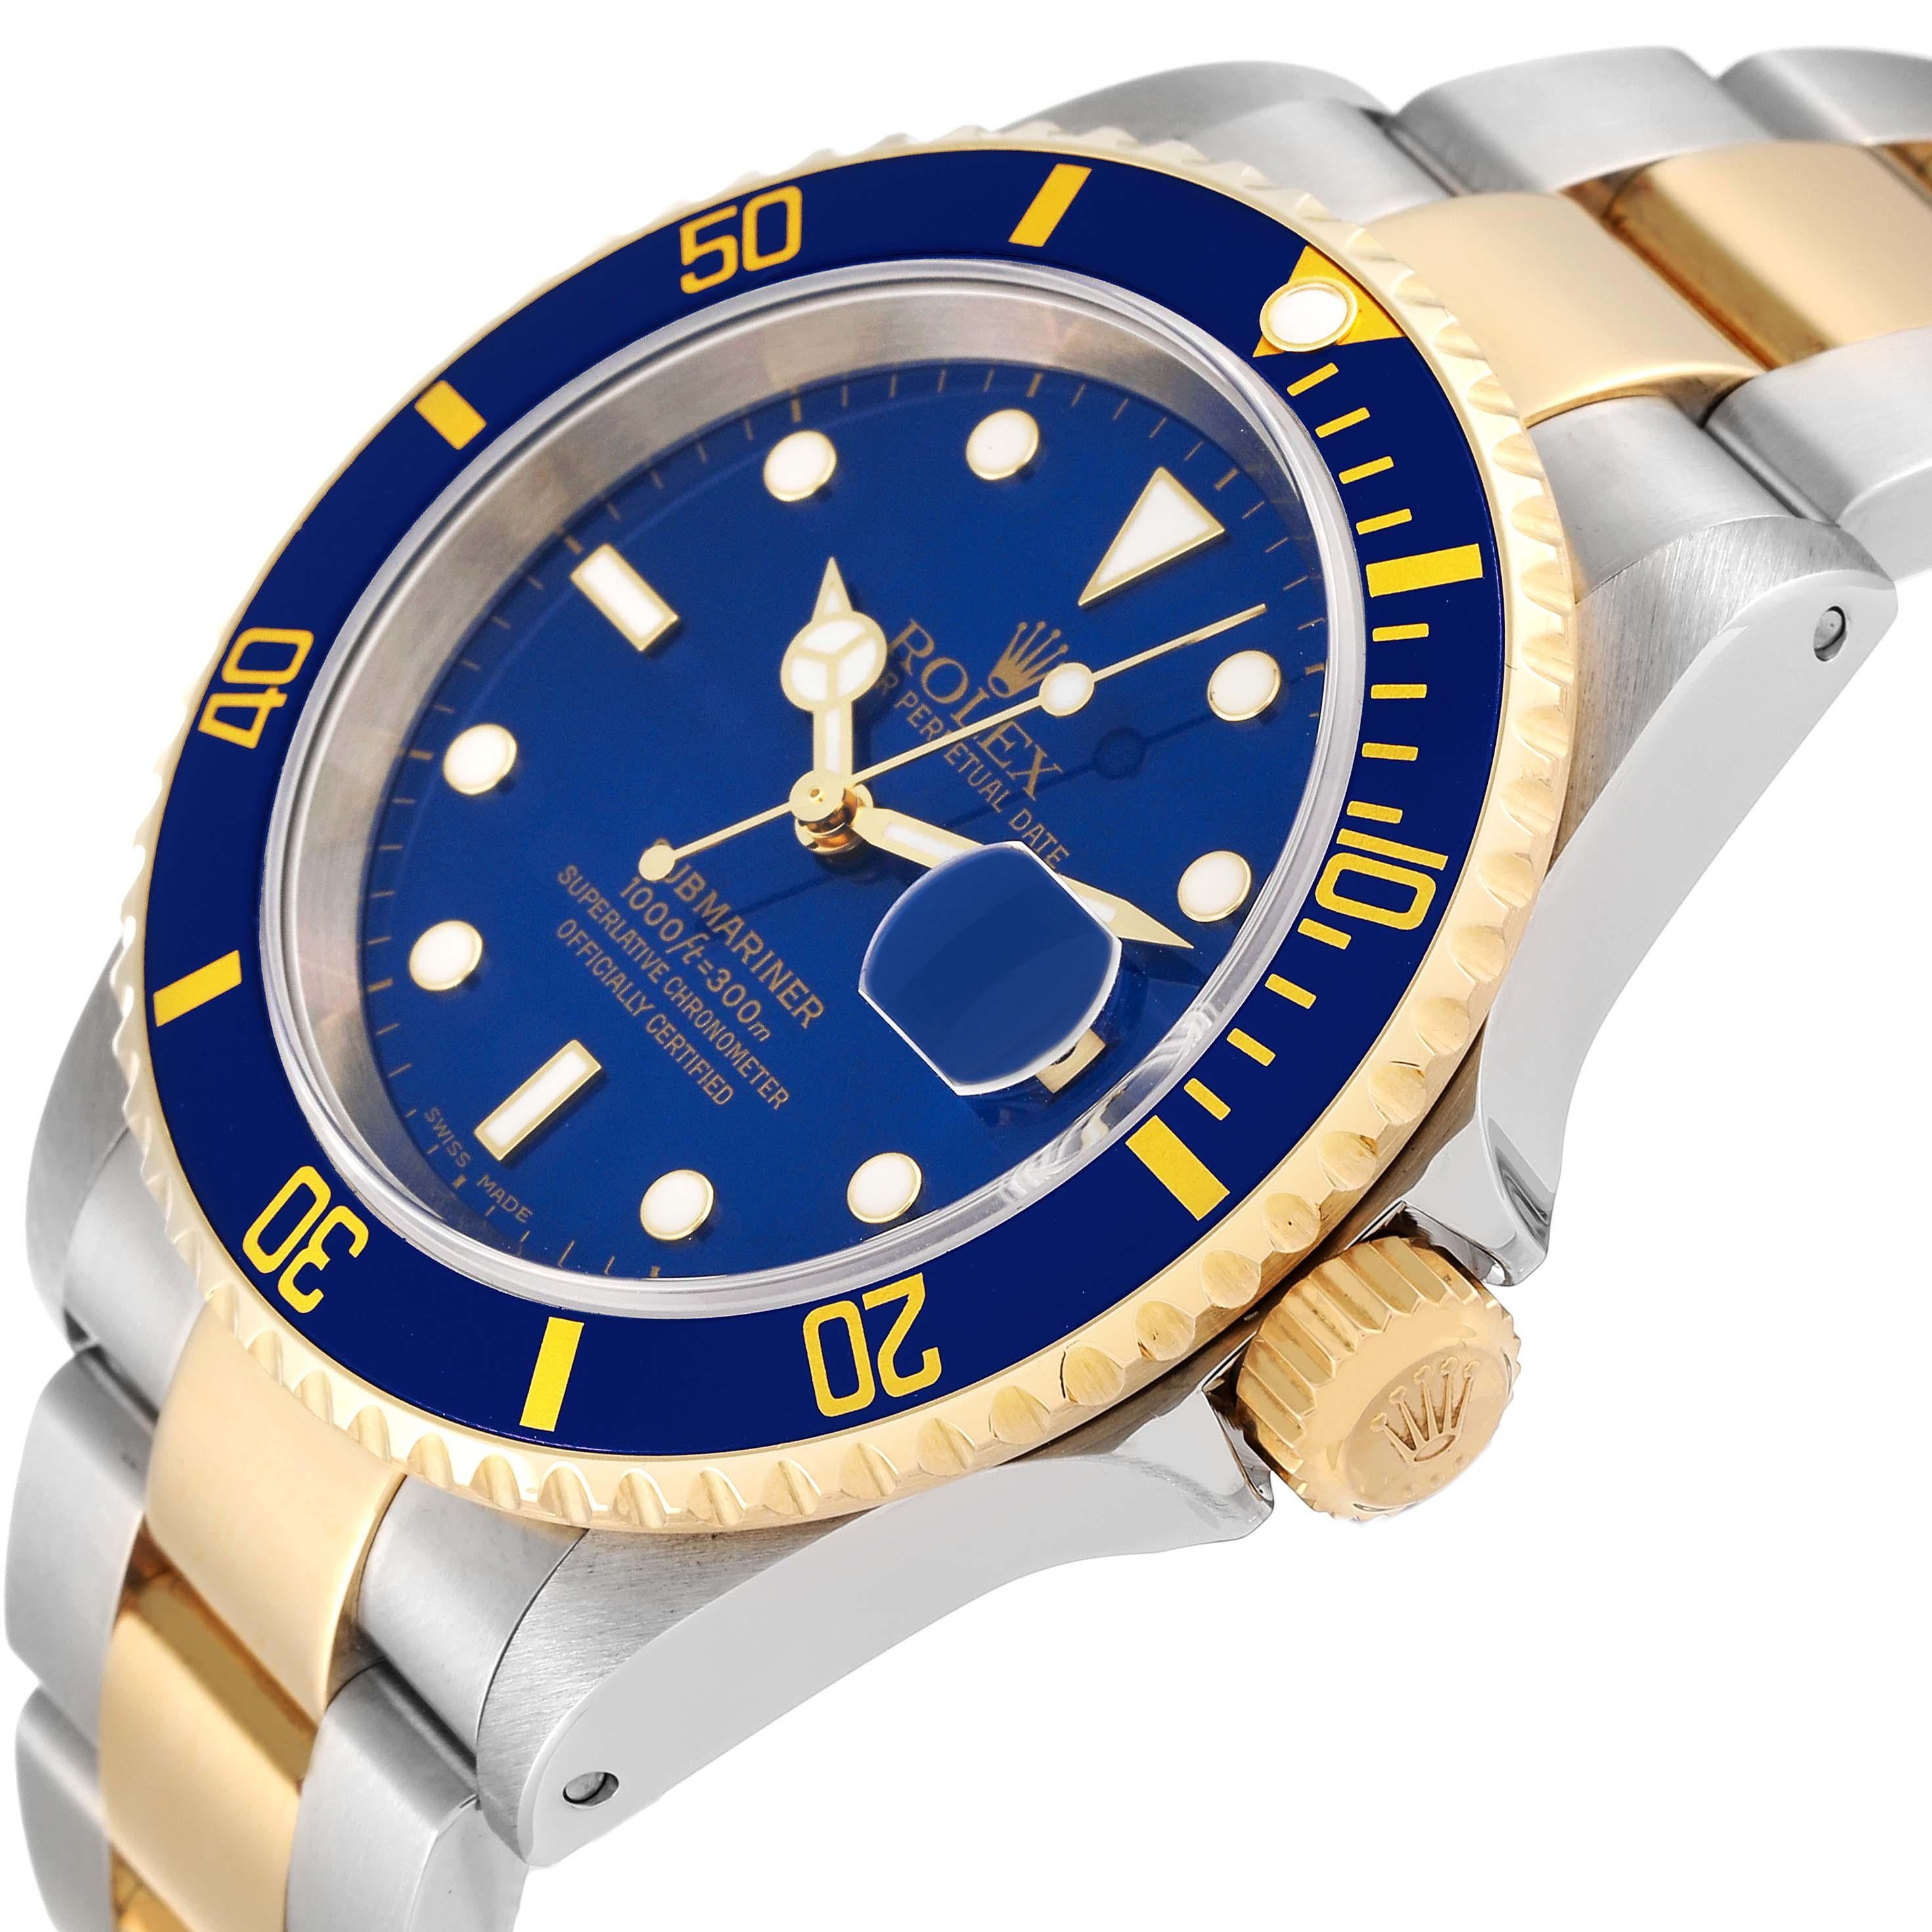 Men's Rolex Submariner Blue Dial Steel Yellow Gold Mens Watch 16613 Box Papers